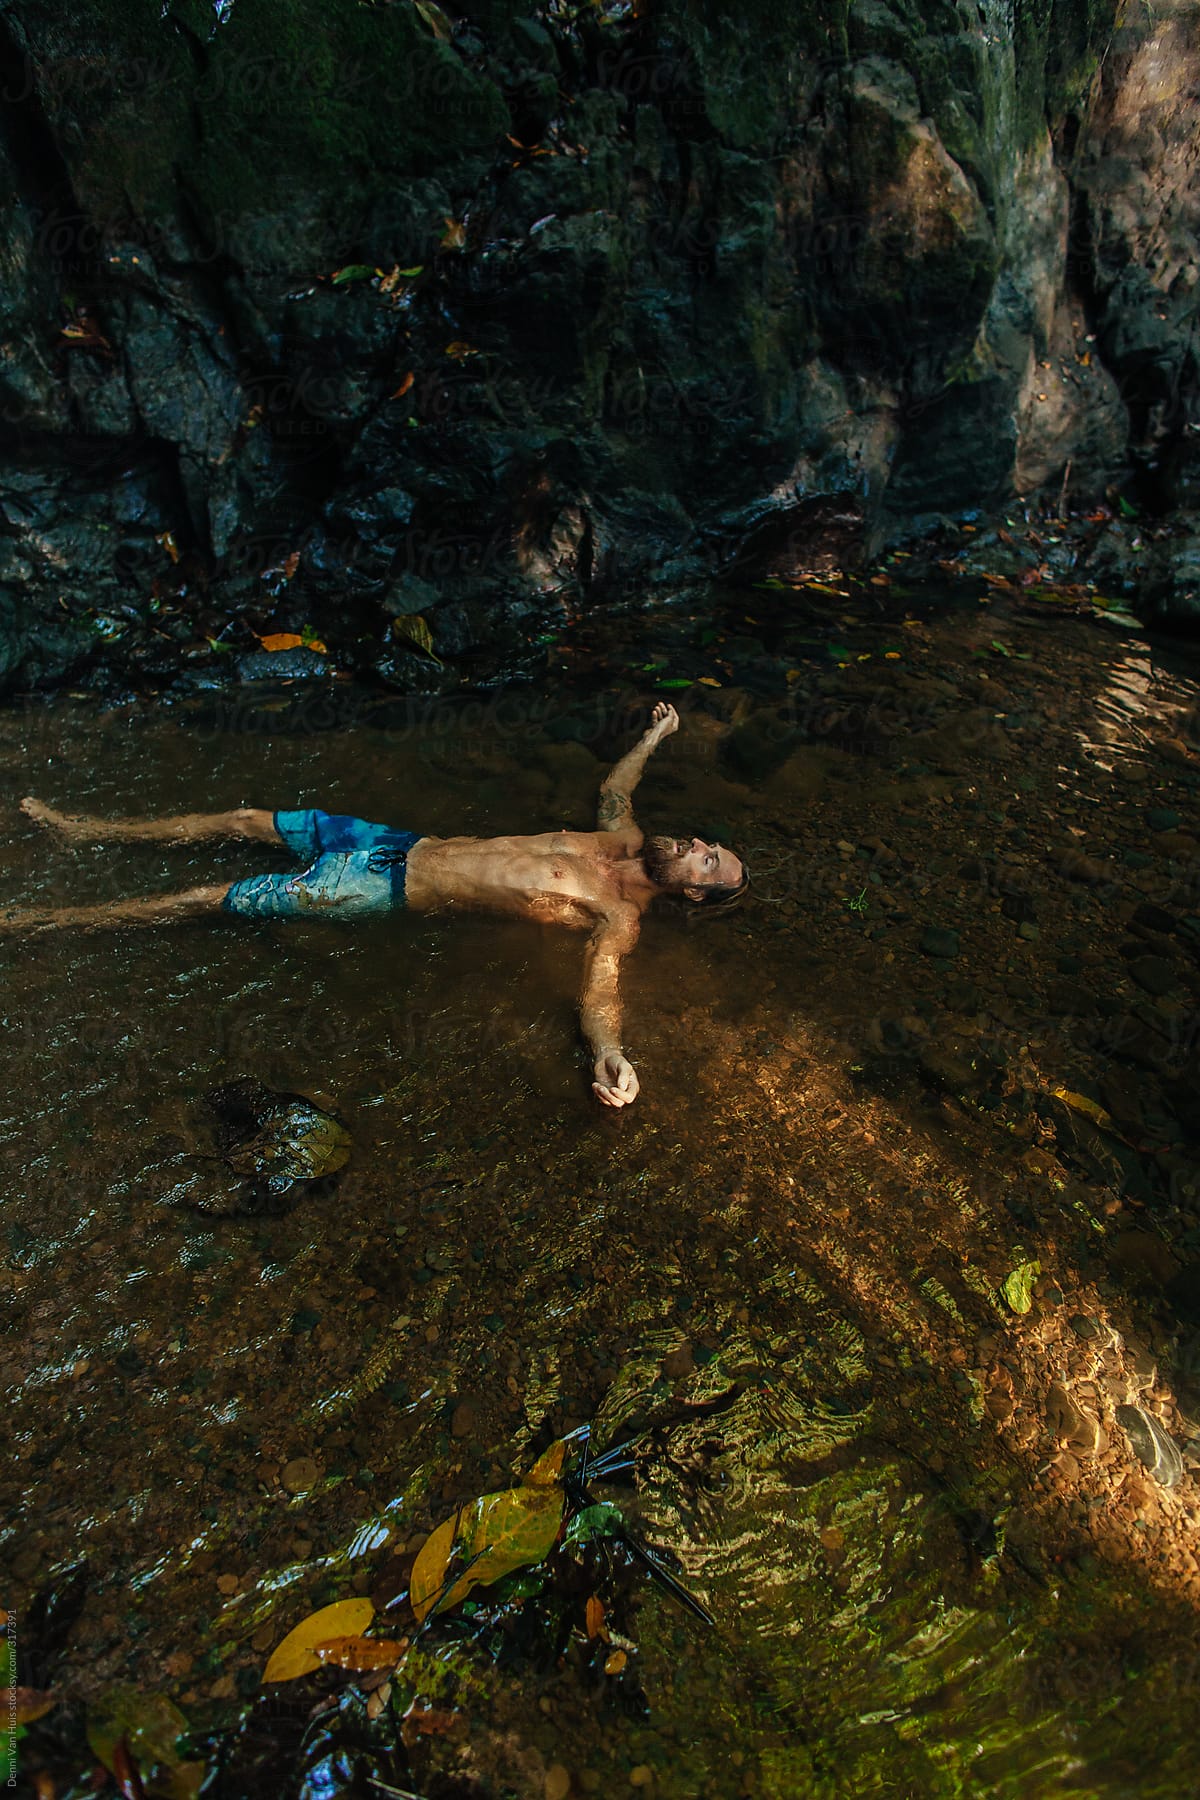 Man floating in clear water.